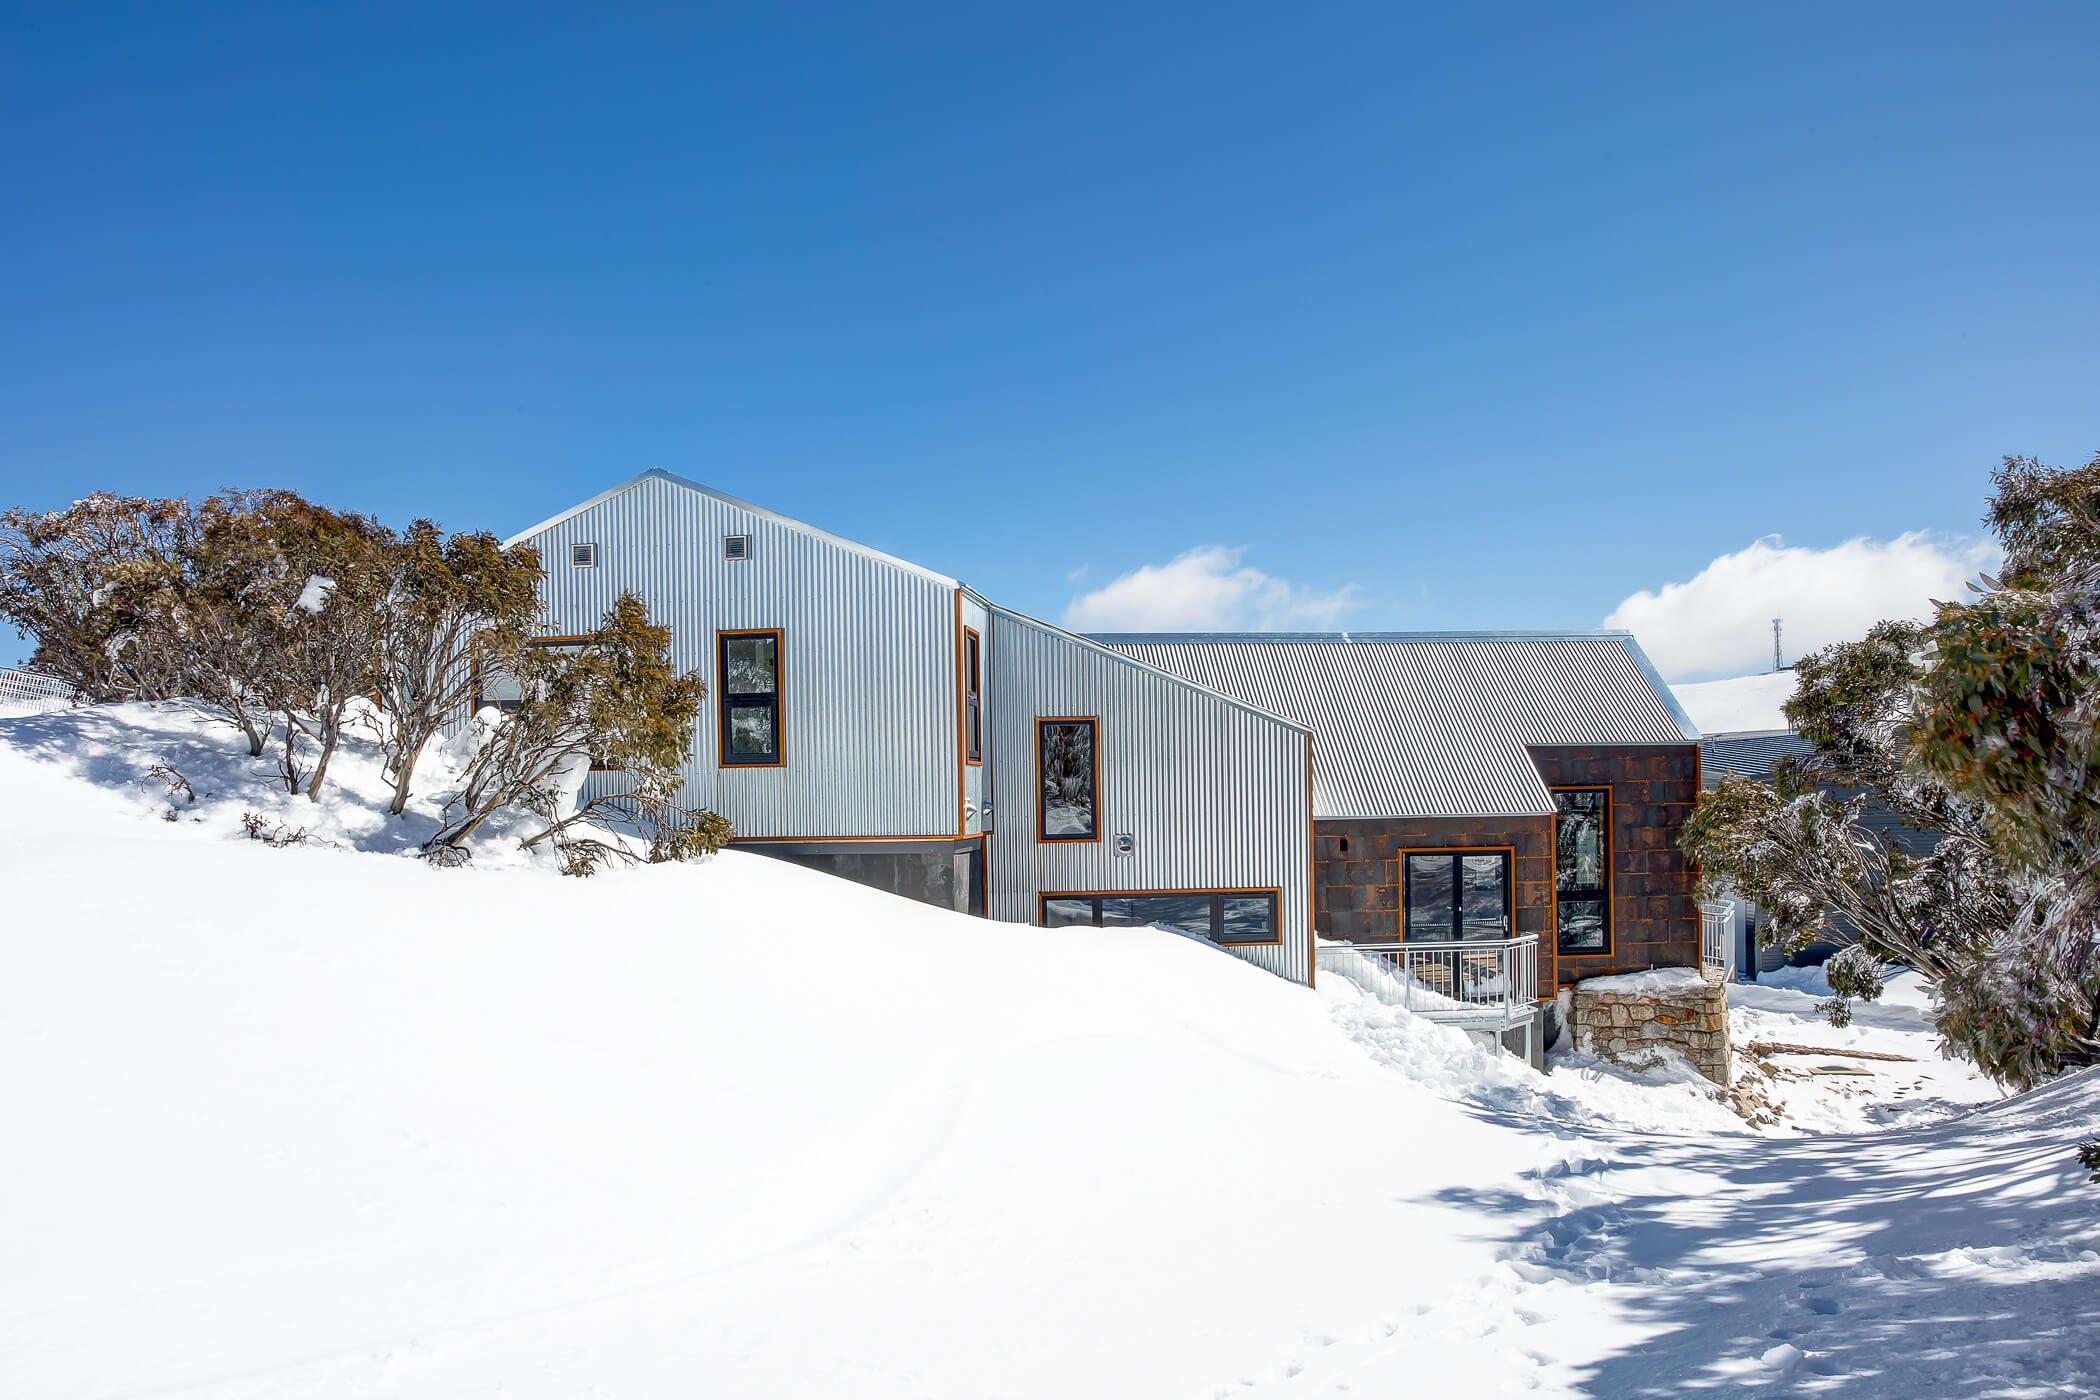 Metal clad snow chalet with deep snow all around